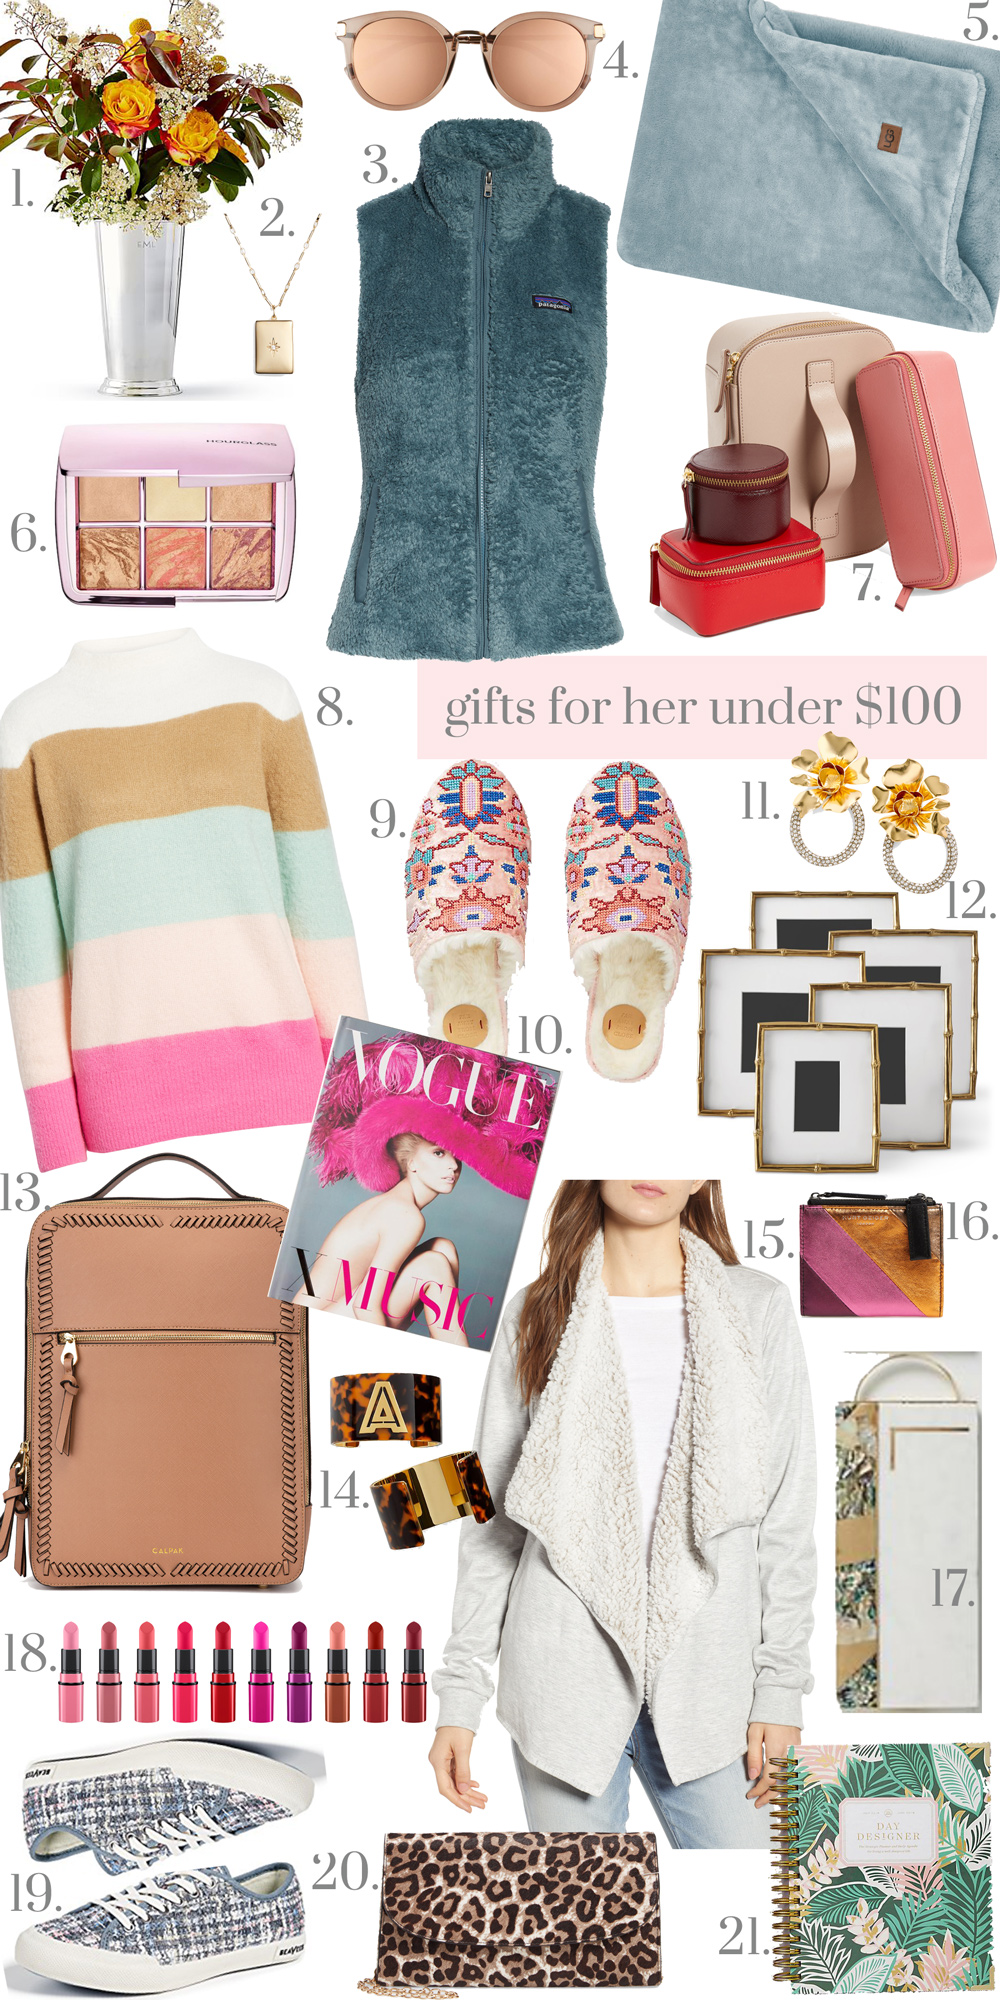 Gifts Under 100 / Gifts for Her Under 100 / Gift Ideas Under 100